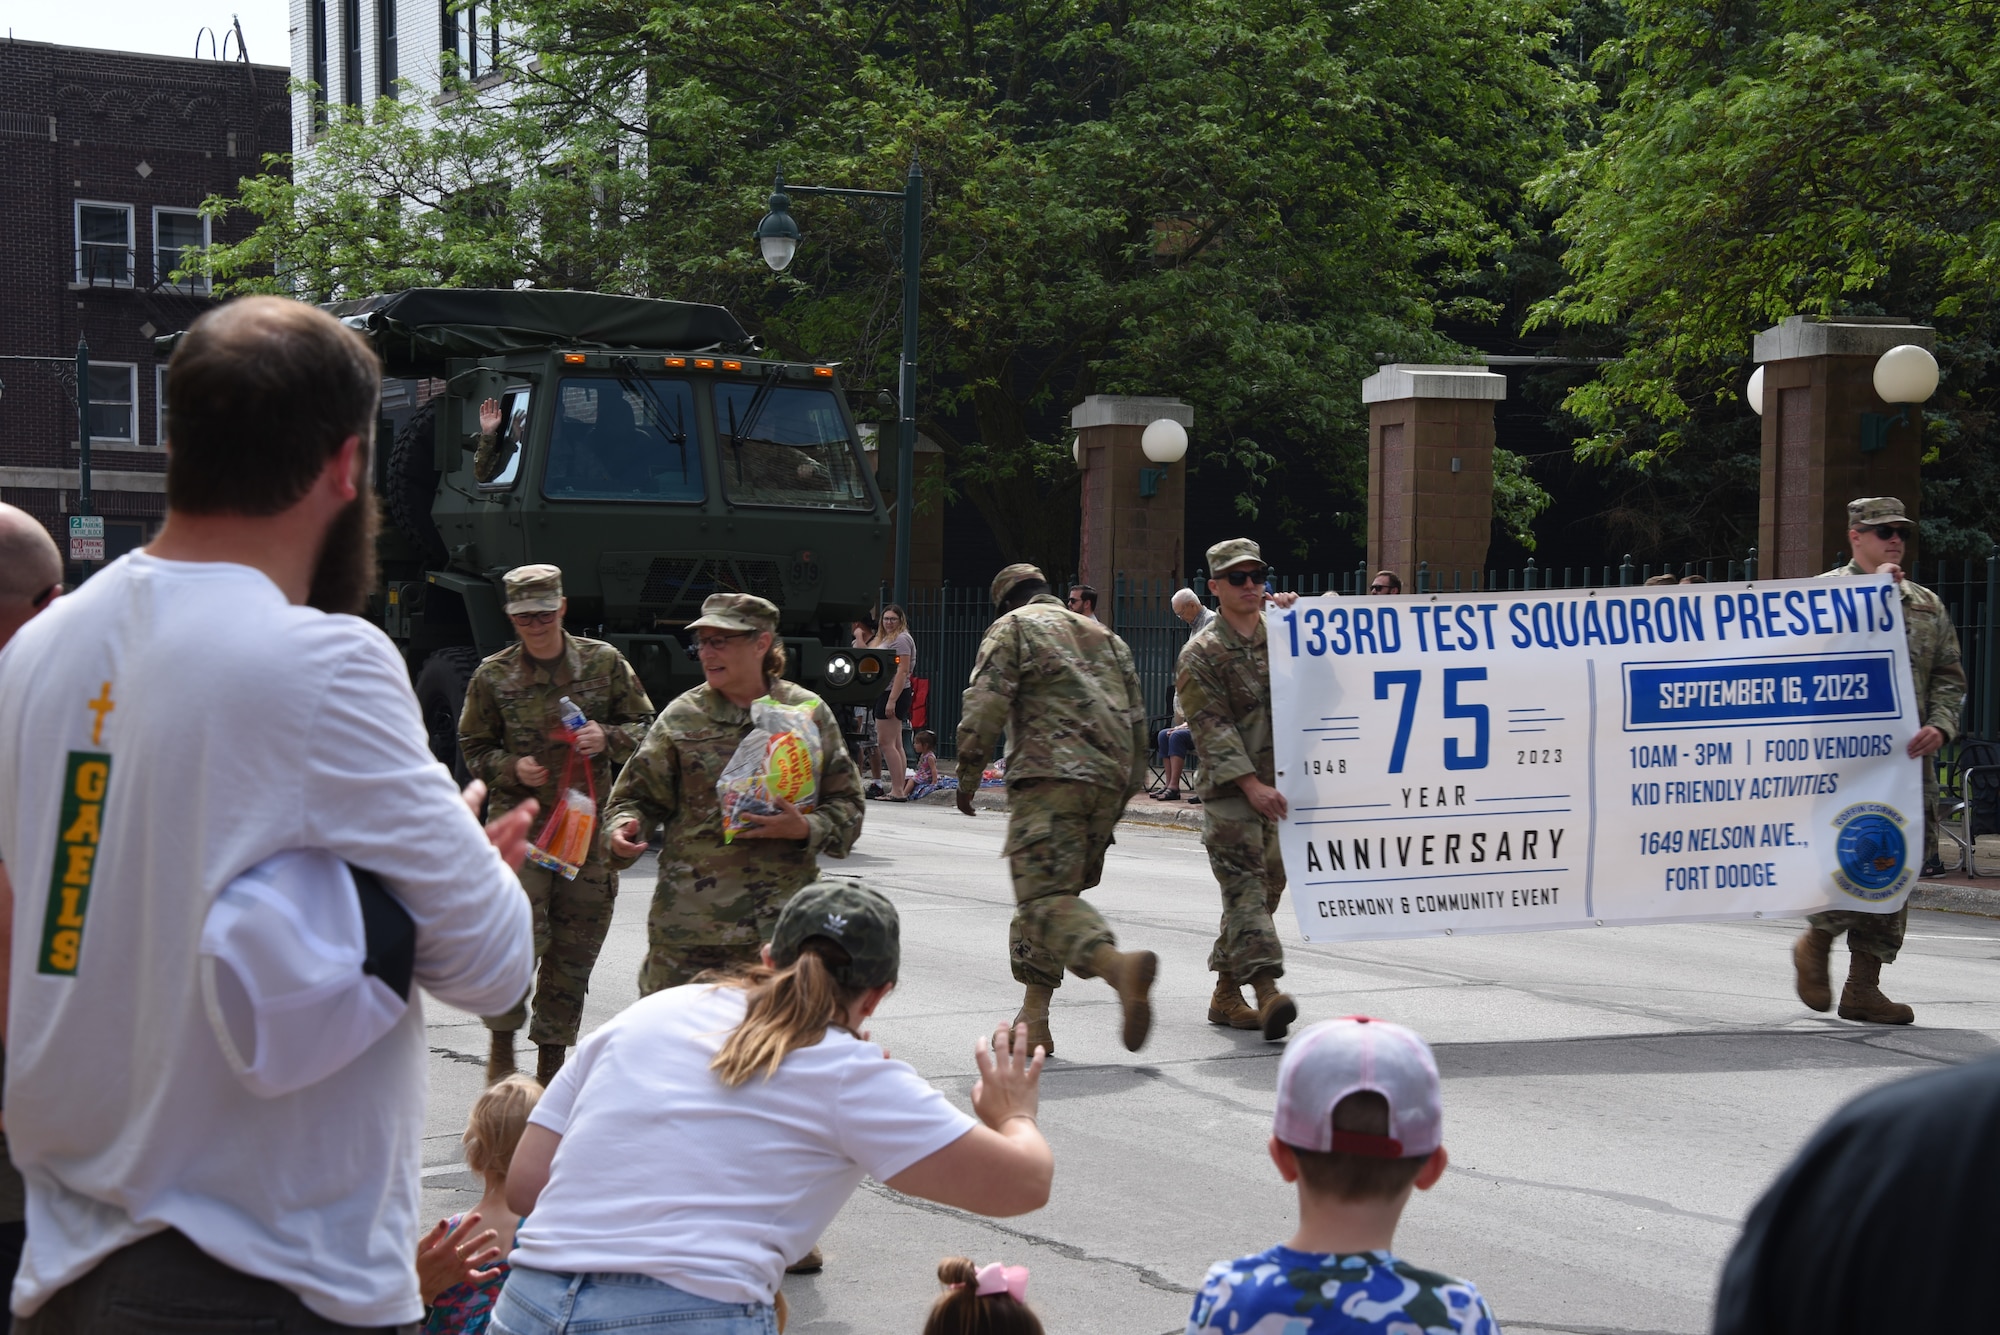 Airmen give treats to parade goers. Airmen hold event banner.